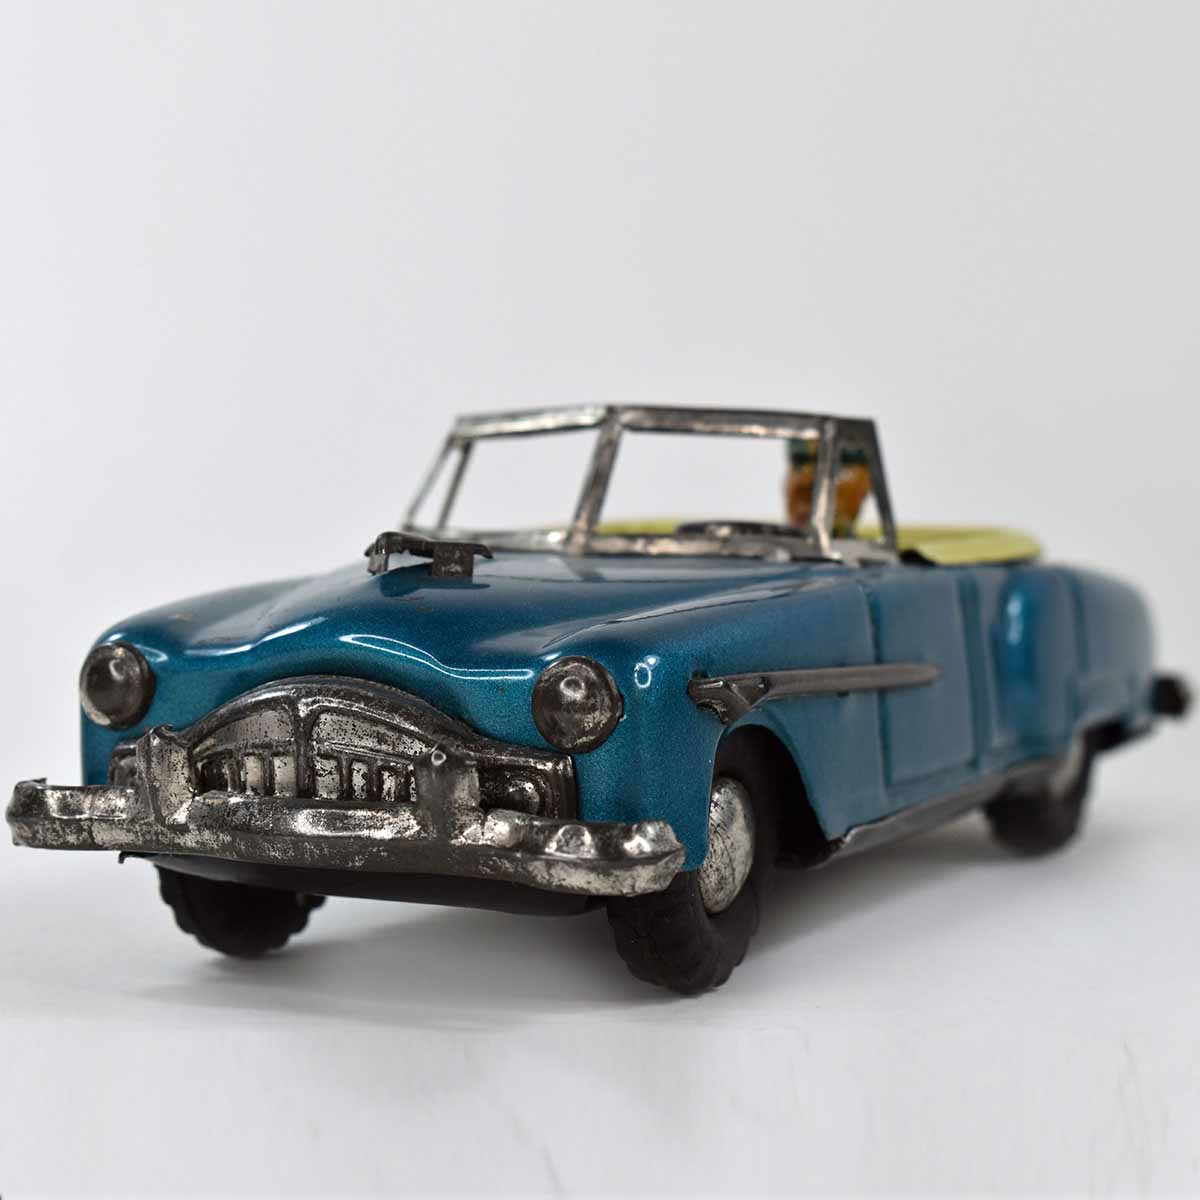 https://www.unclealstoys.com/wp-content/uploads/2021/06/EARLY-50S-TIN-FRICTION-PACKARD-CONVERTIBLE-OPEN-CAR-W-DRIVER-JAPAN-12.jpg